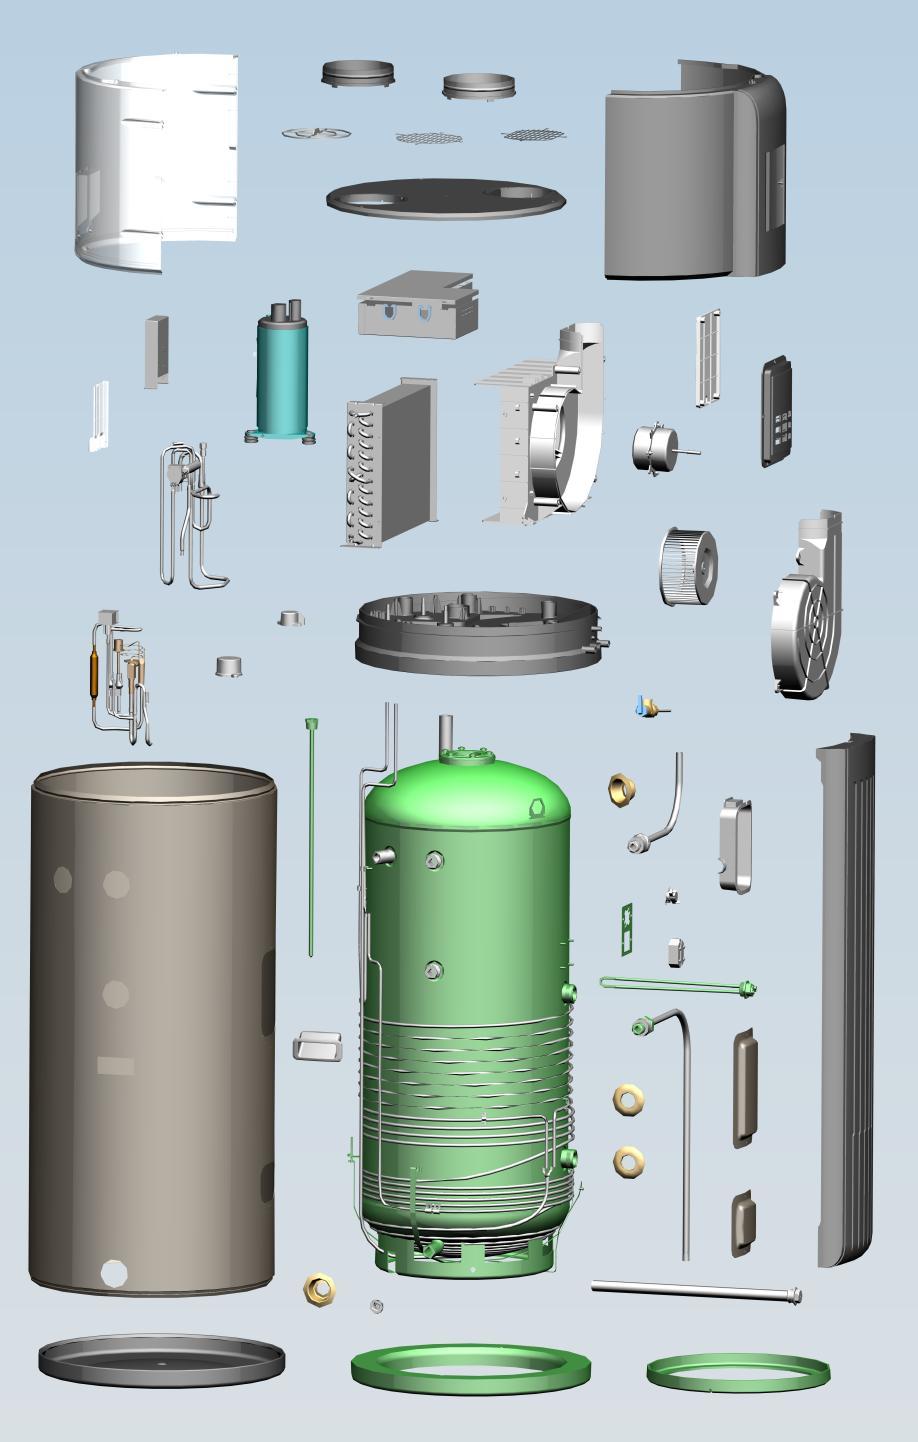 Exploded view of model: SWH-15/190T 1 2 3 4 5 6 7 30 29 28 27 26 8 9 10